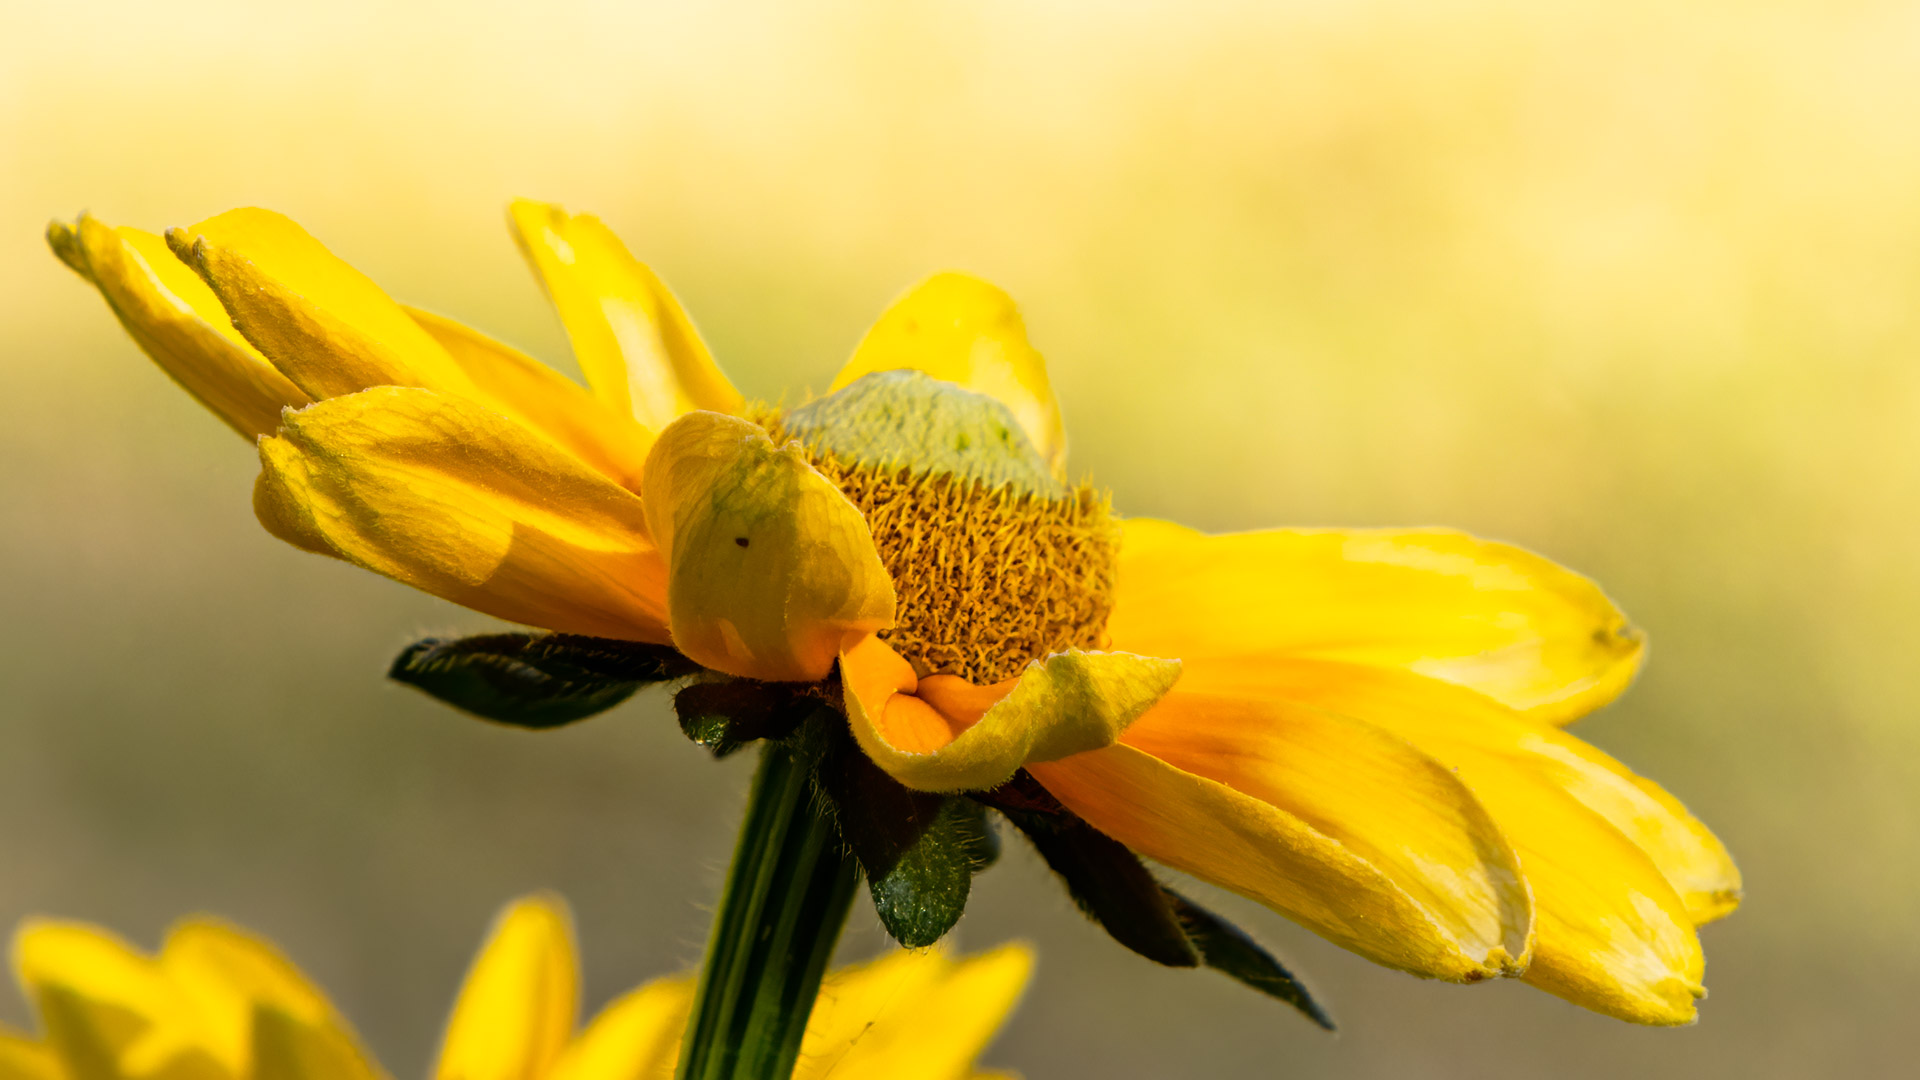 Indulge in the stunning allure of nature with our high-resolution yellow flower desktop wallpaper.